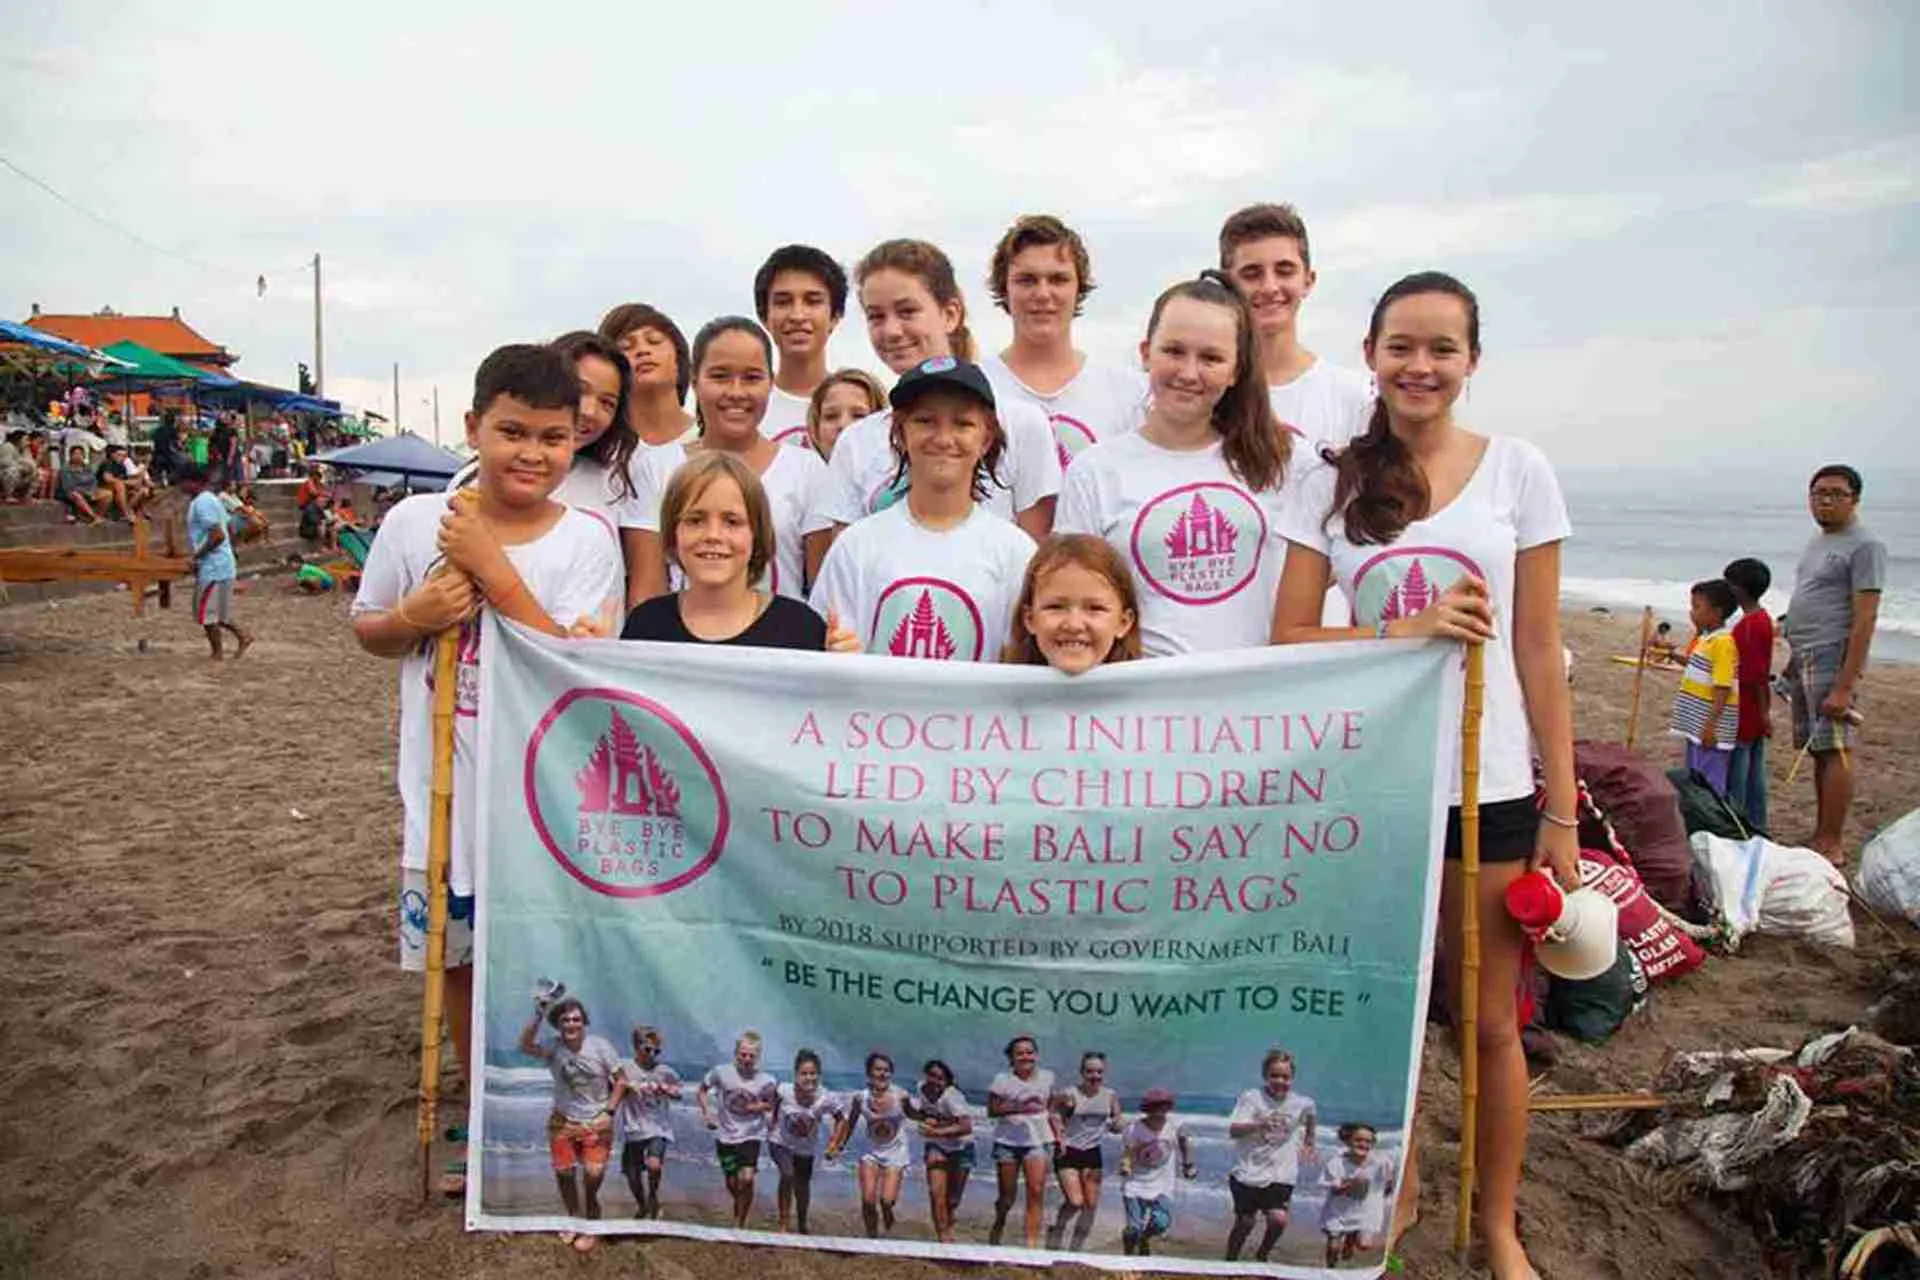 These young people just cleaned the beach